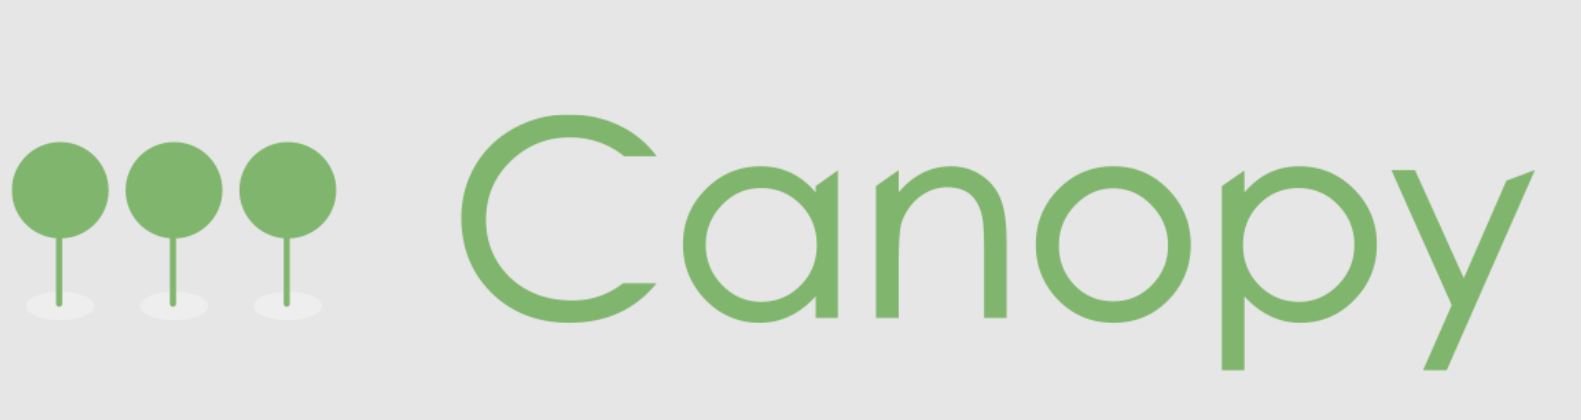 Canopy Software, Inc.